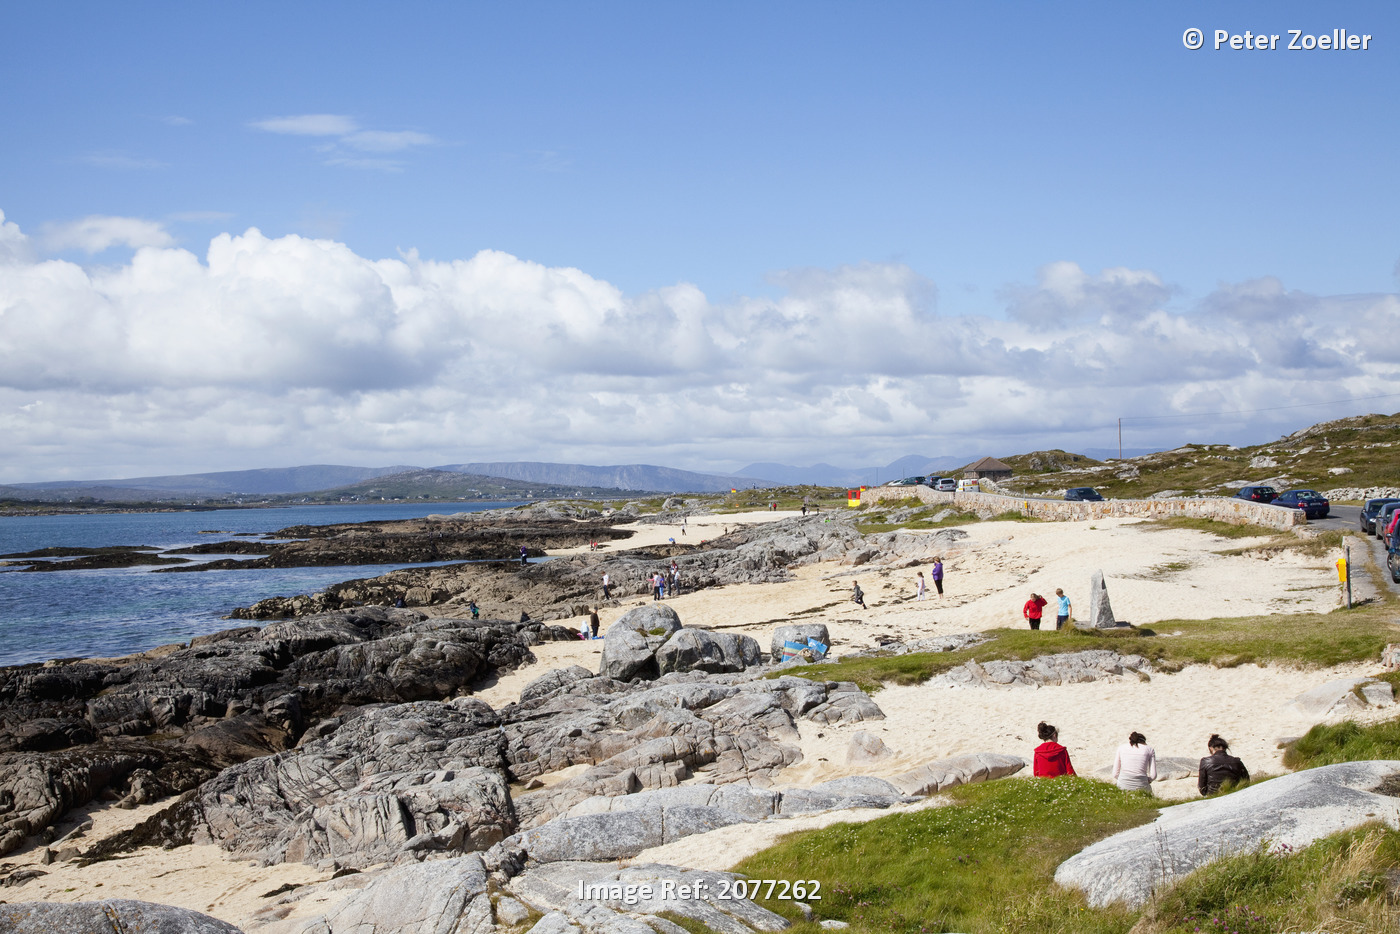 People At The Coral Beach Near Carrowroe; County Galway Ireland